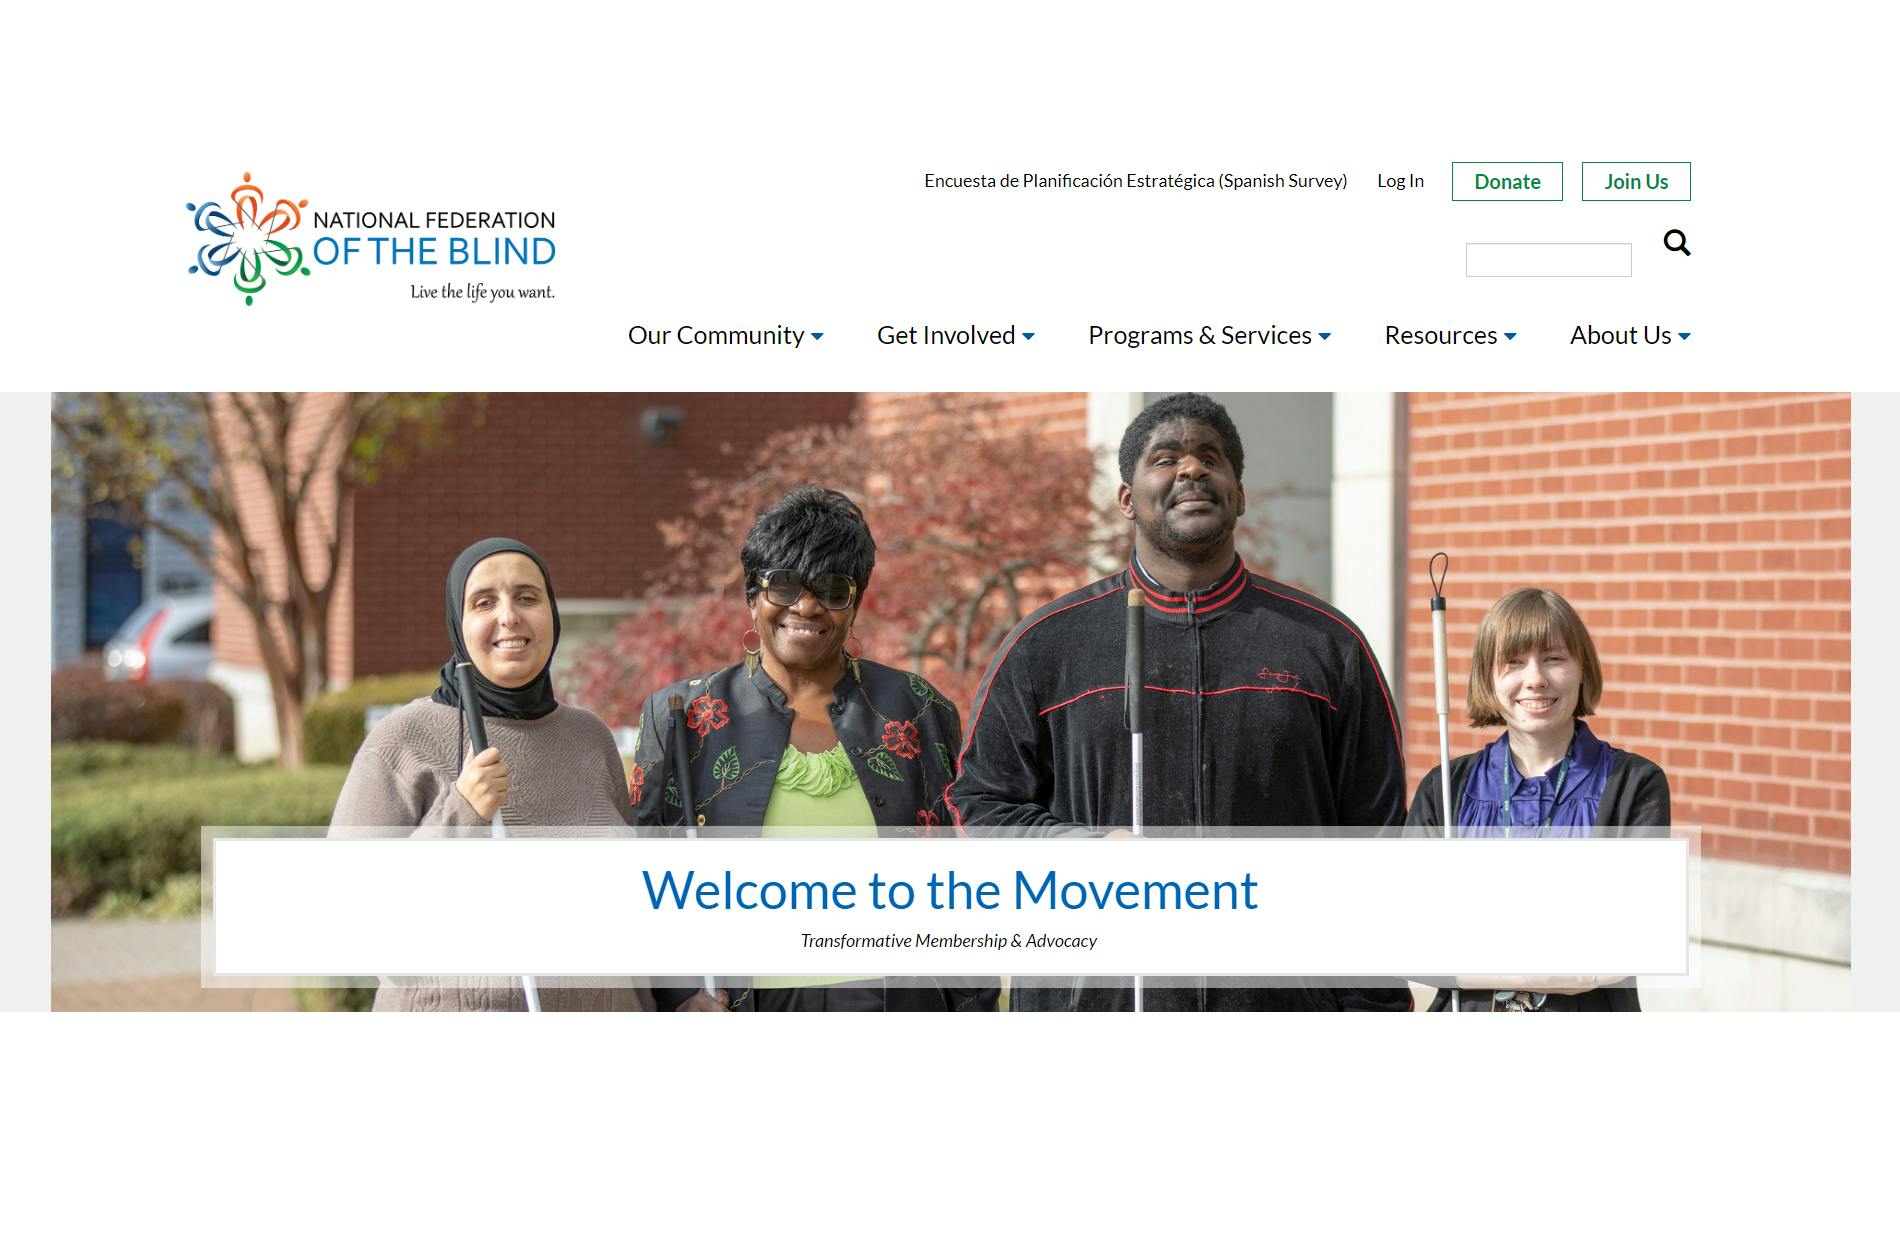 The National Federation of the Blind website with four visually impaired people each holding a cane.